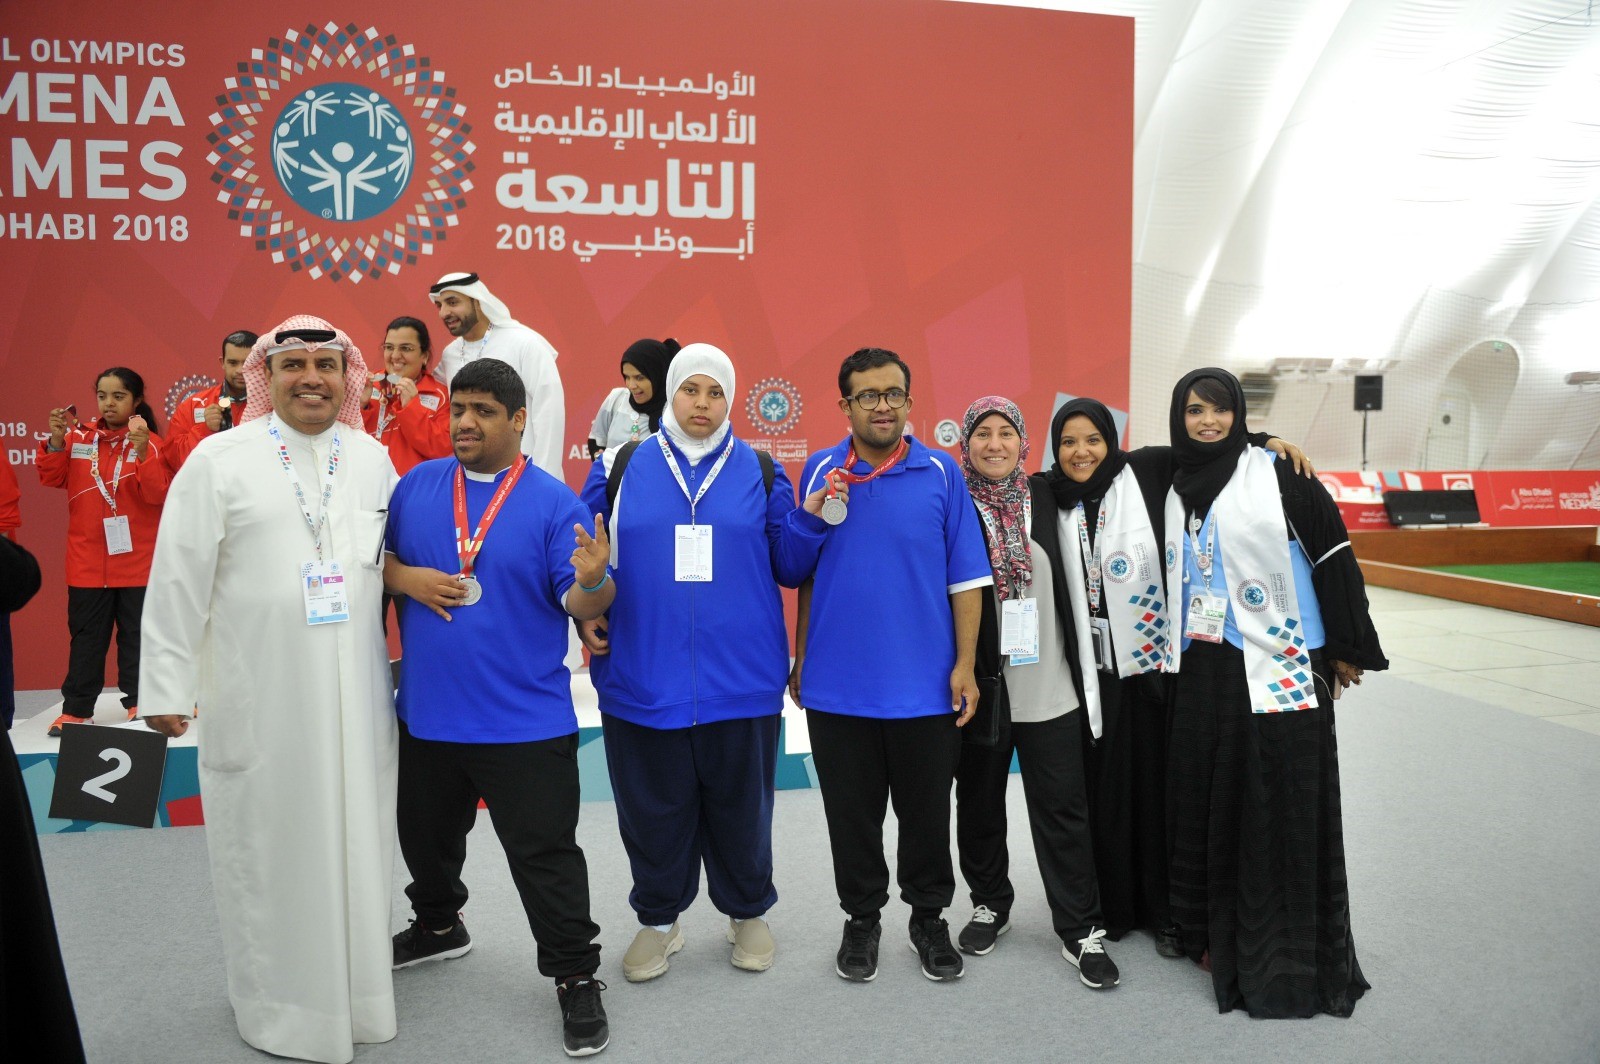 Kuwaiti athletes Abdulalh Al-Hajri and Hamad Al-Shegy won the silver medal in the double Bocce competition